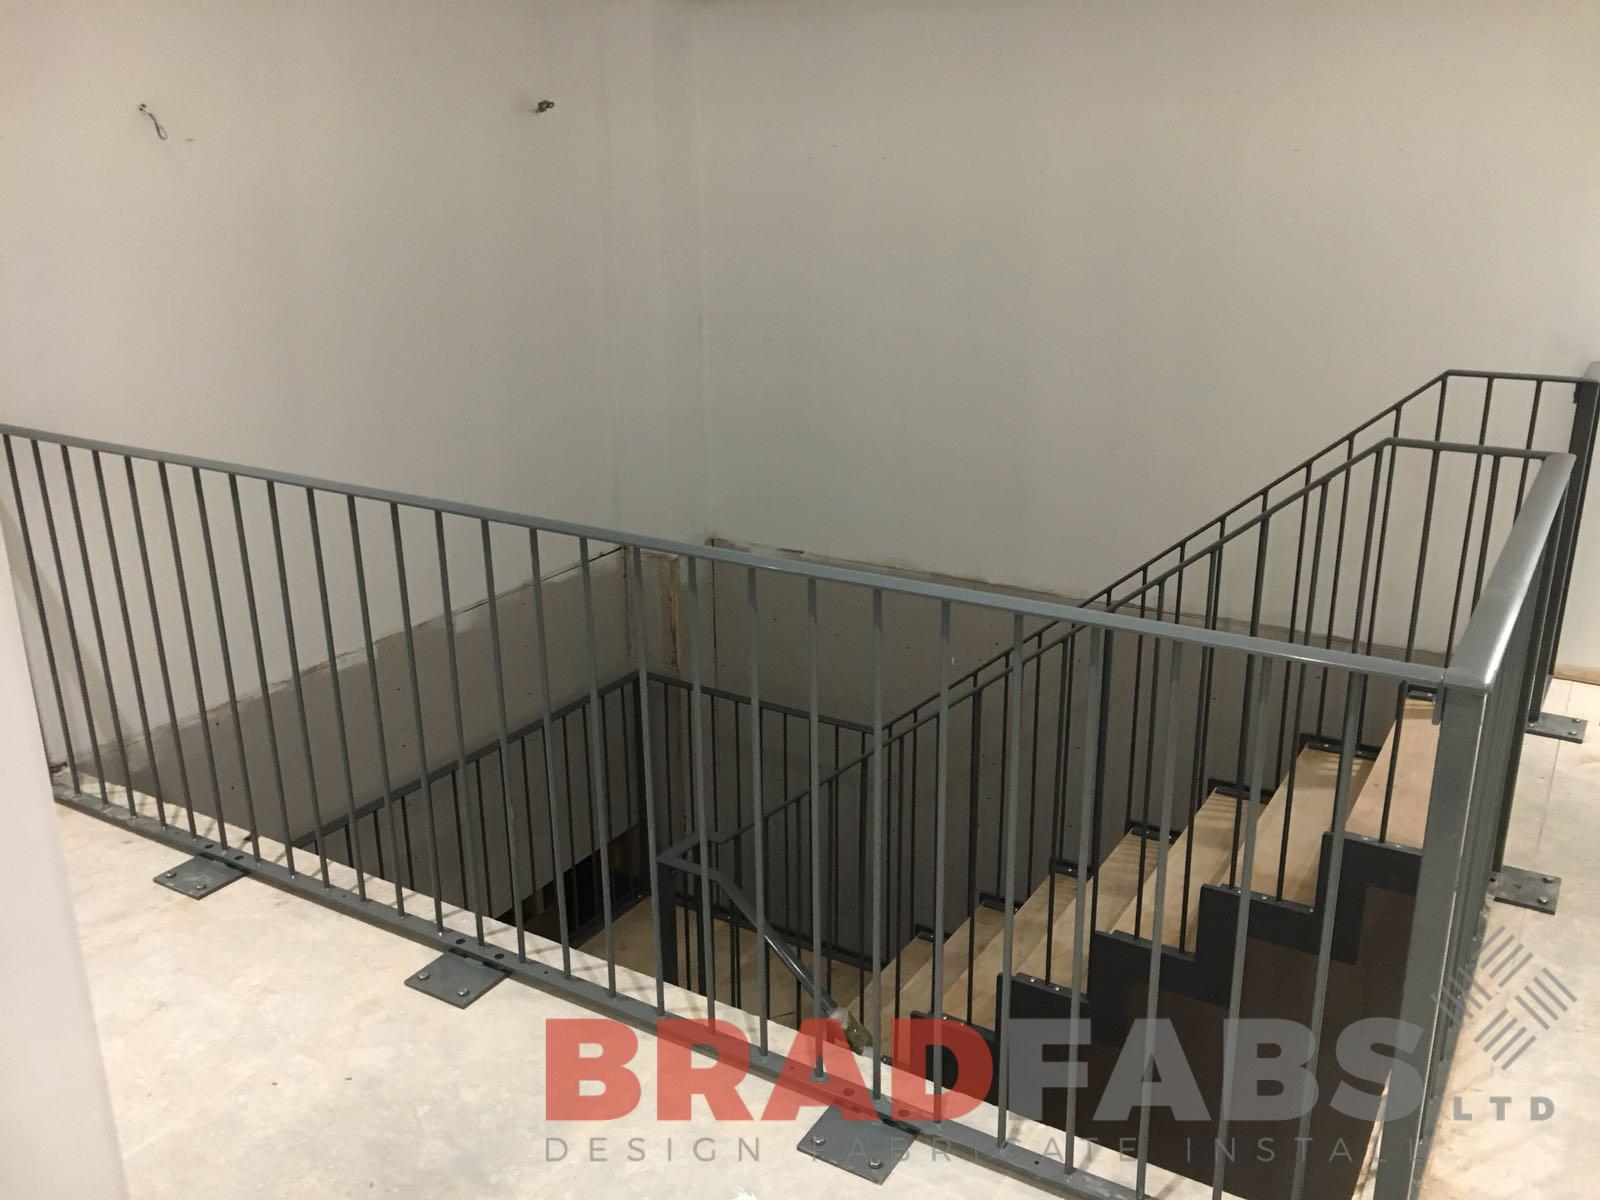 Bespoke railings for a domestic property, manufactured in mild steel and powder coated with convex flat bar handrail by Bradfabs Ltd 